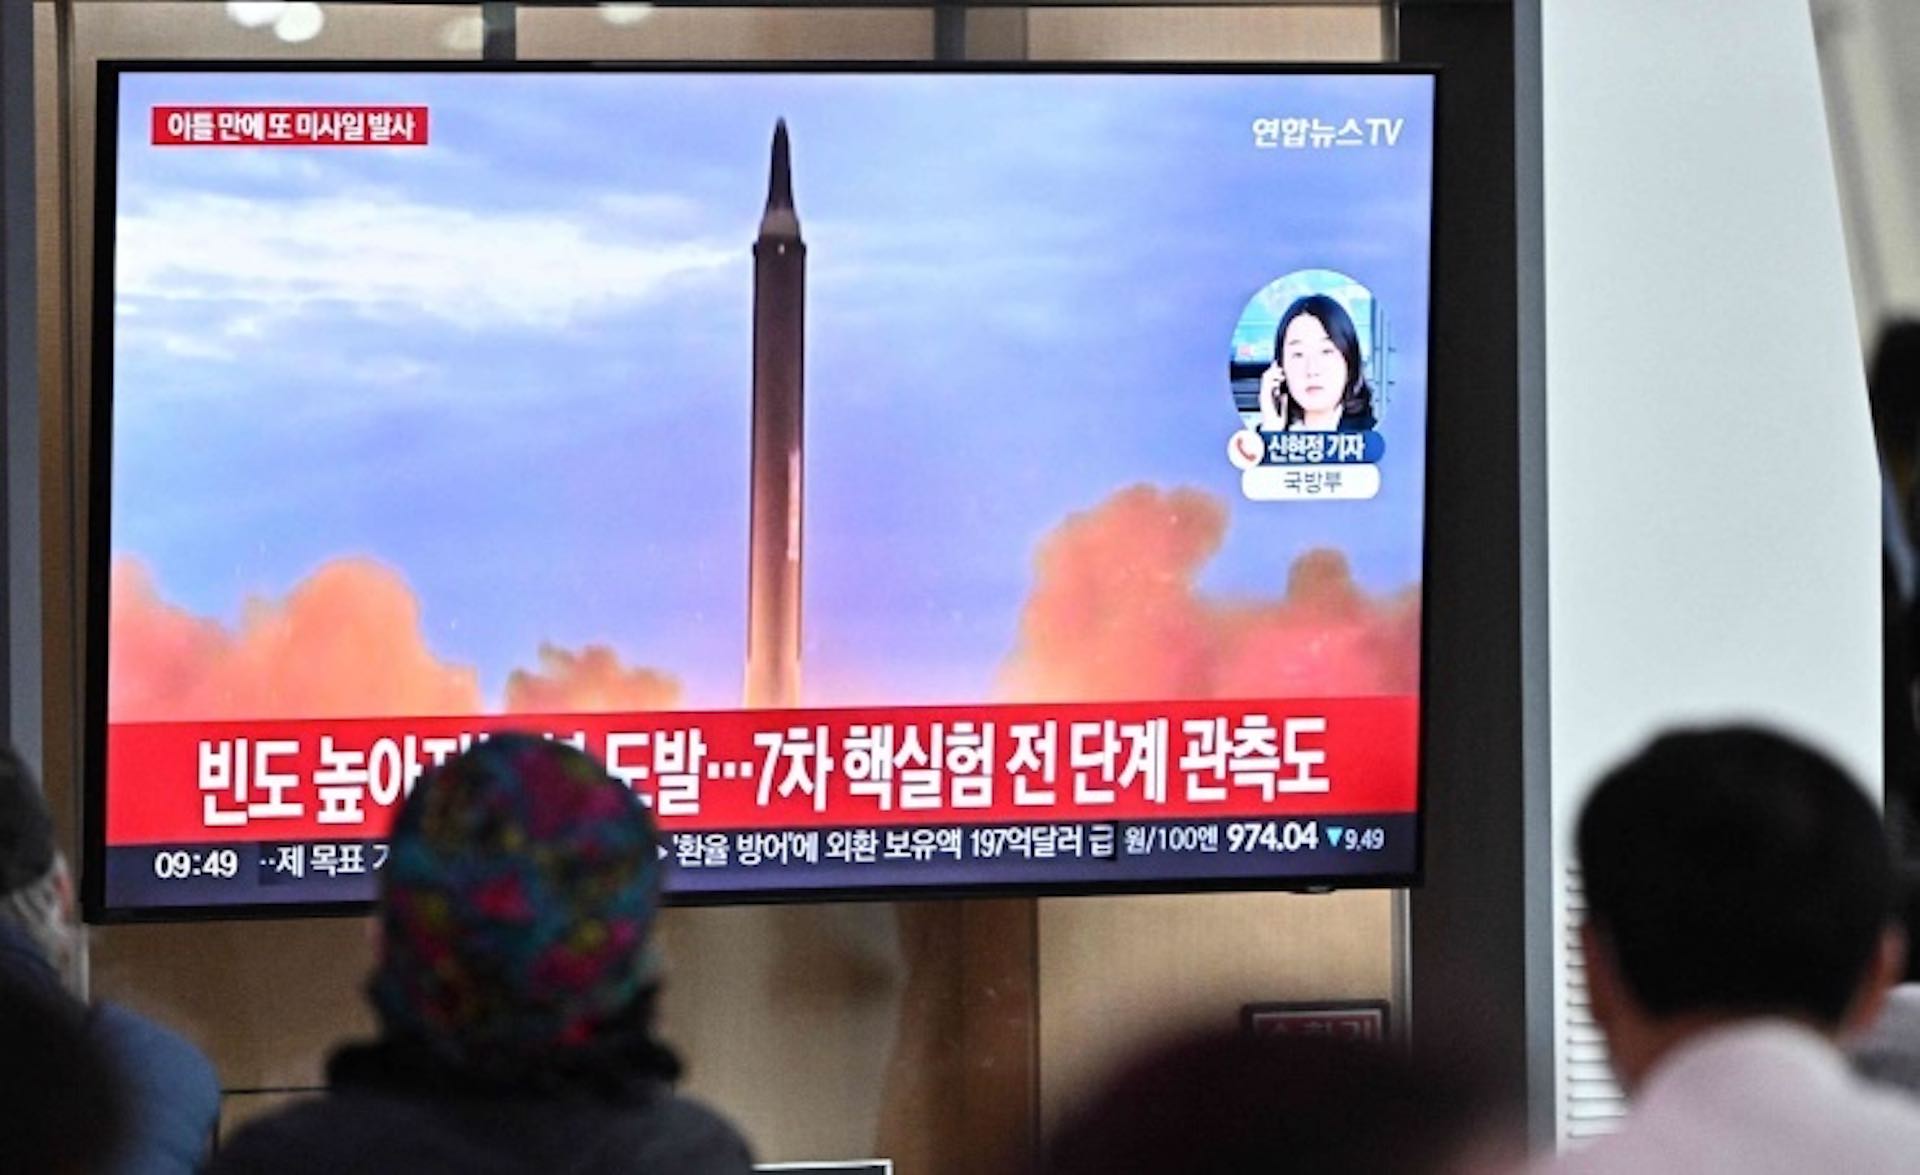 North Korea launches two missiles following US-South Korea drills